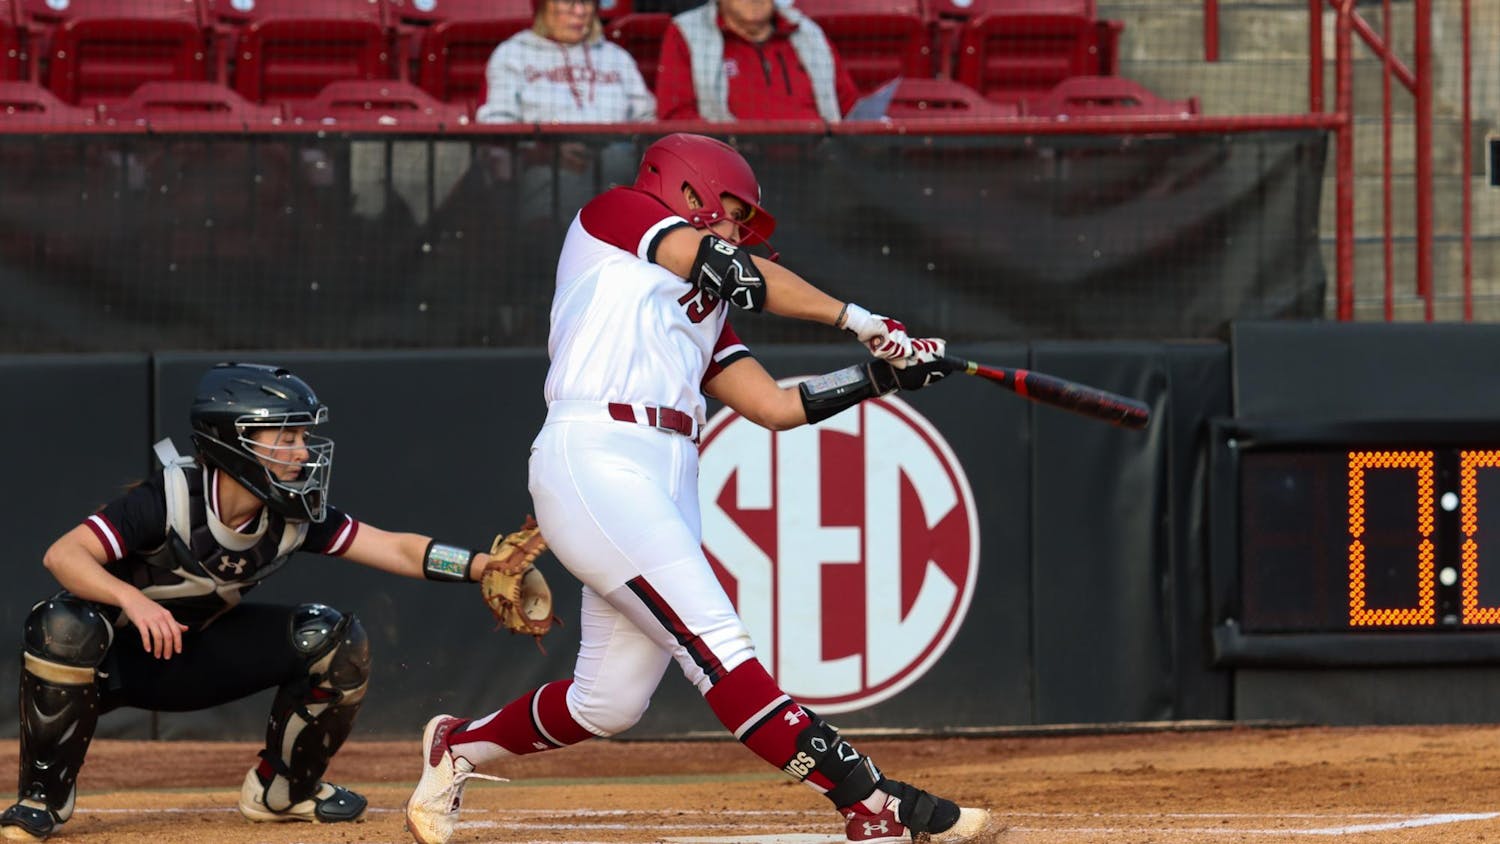 Senior catcher Jen Cummings hits to the outfield during South Carolina's matchup against the College of Charleston on Feb. 28, 2024. Cummings later scored, contributing to the four total runs earned by the Gamecocks in its 4-0 victory.